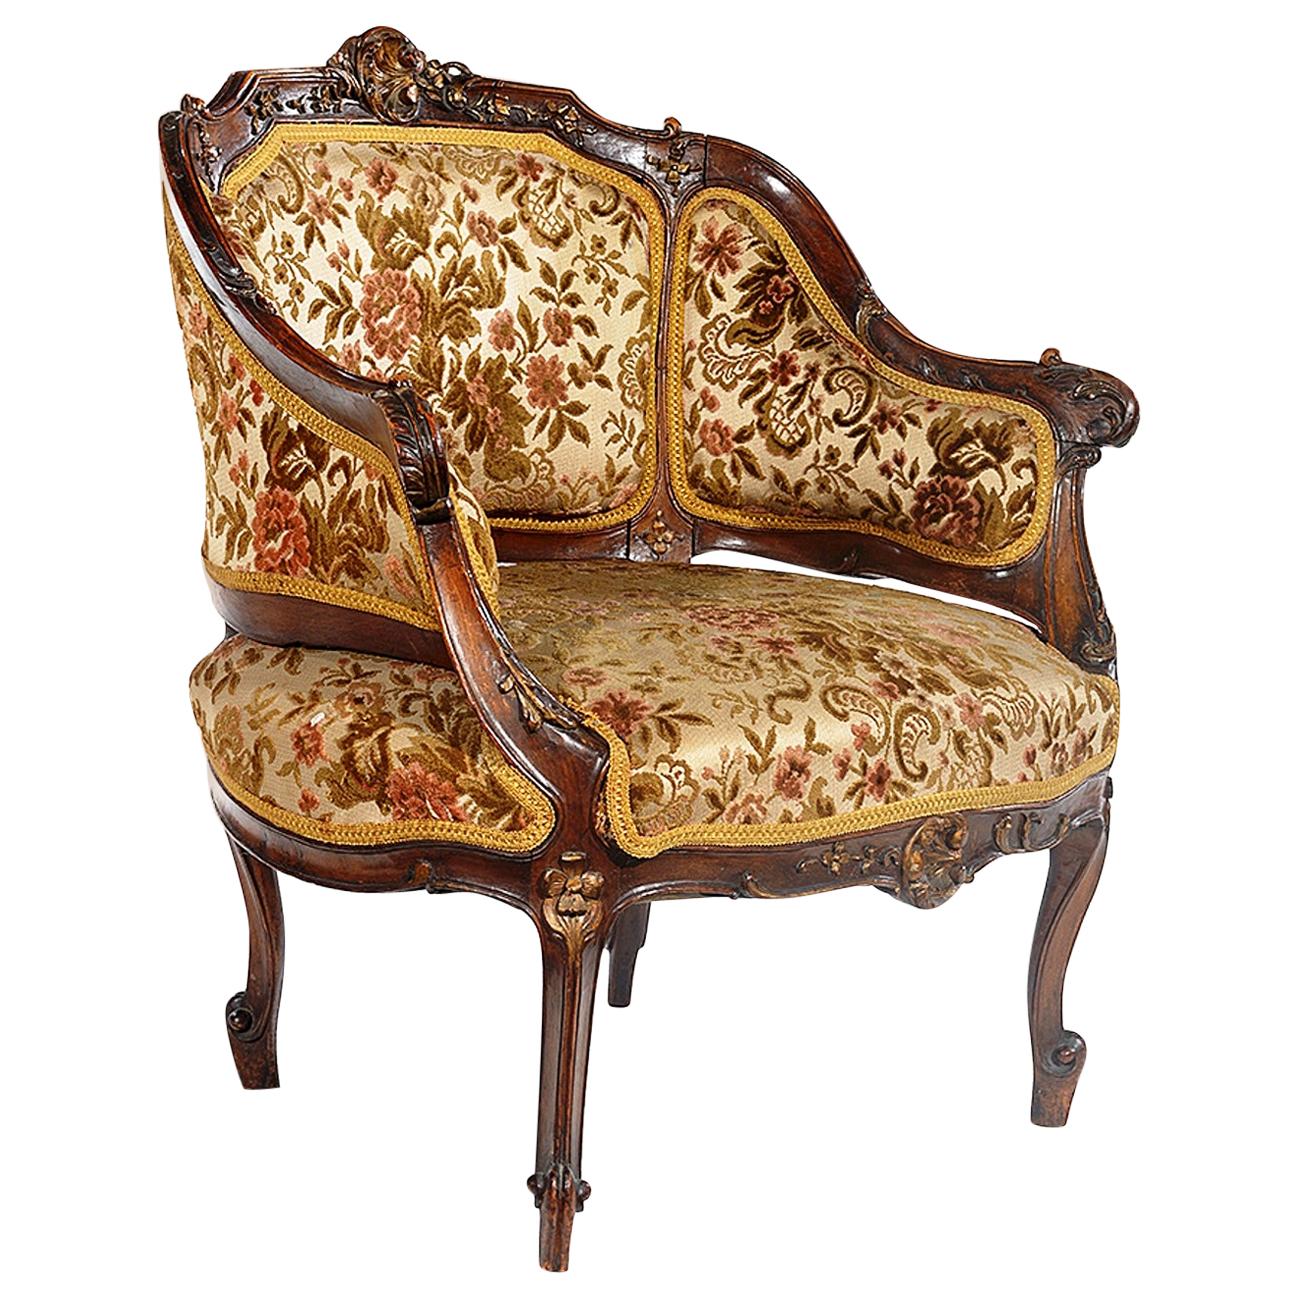 Late 19th Century French Louis XV Style Walnut Framed Petite Bergère Chair For Sale